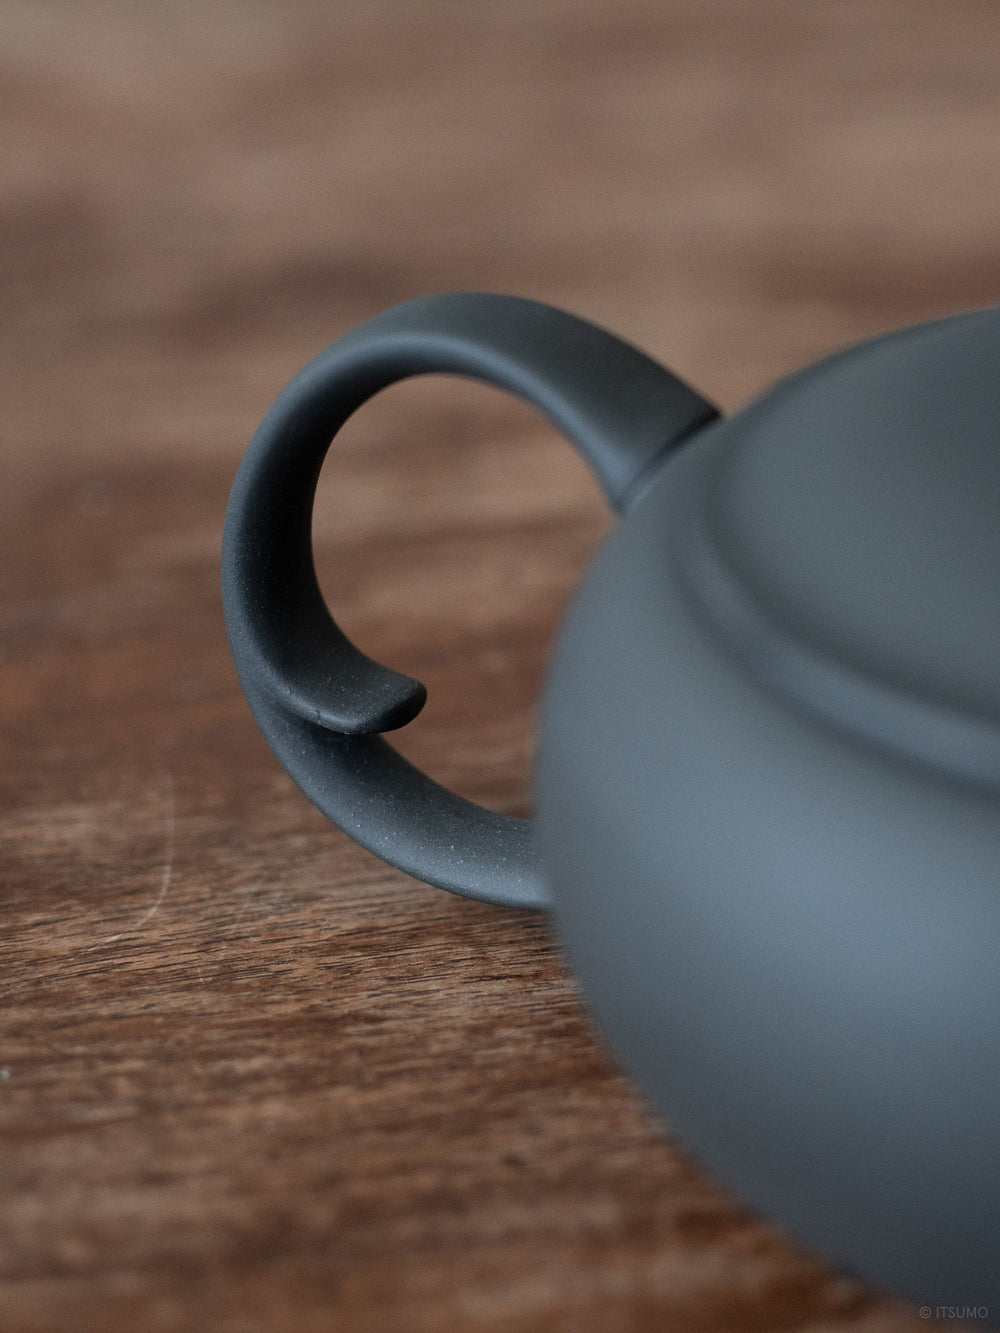 Azmaya’s oval teapot in unglazed in matte black ceramic with a round back handle